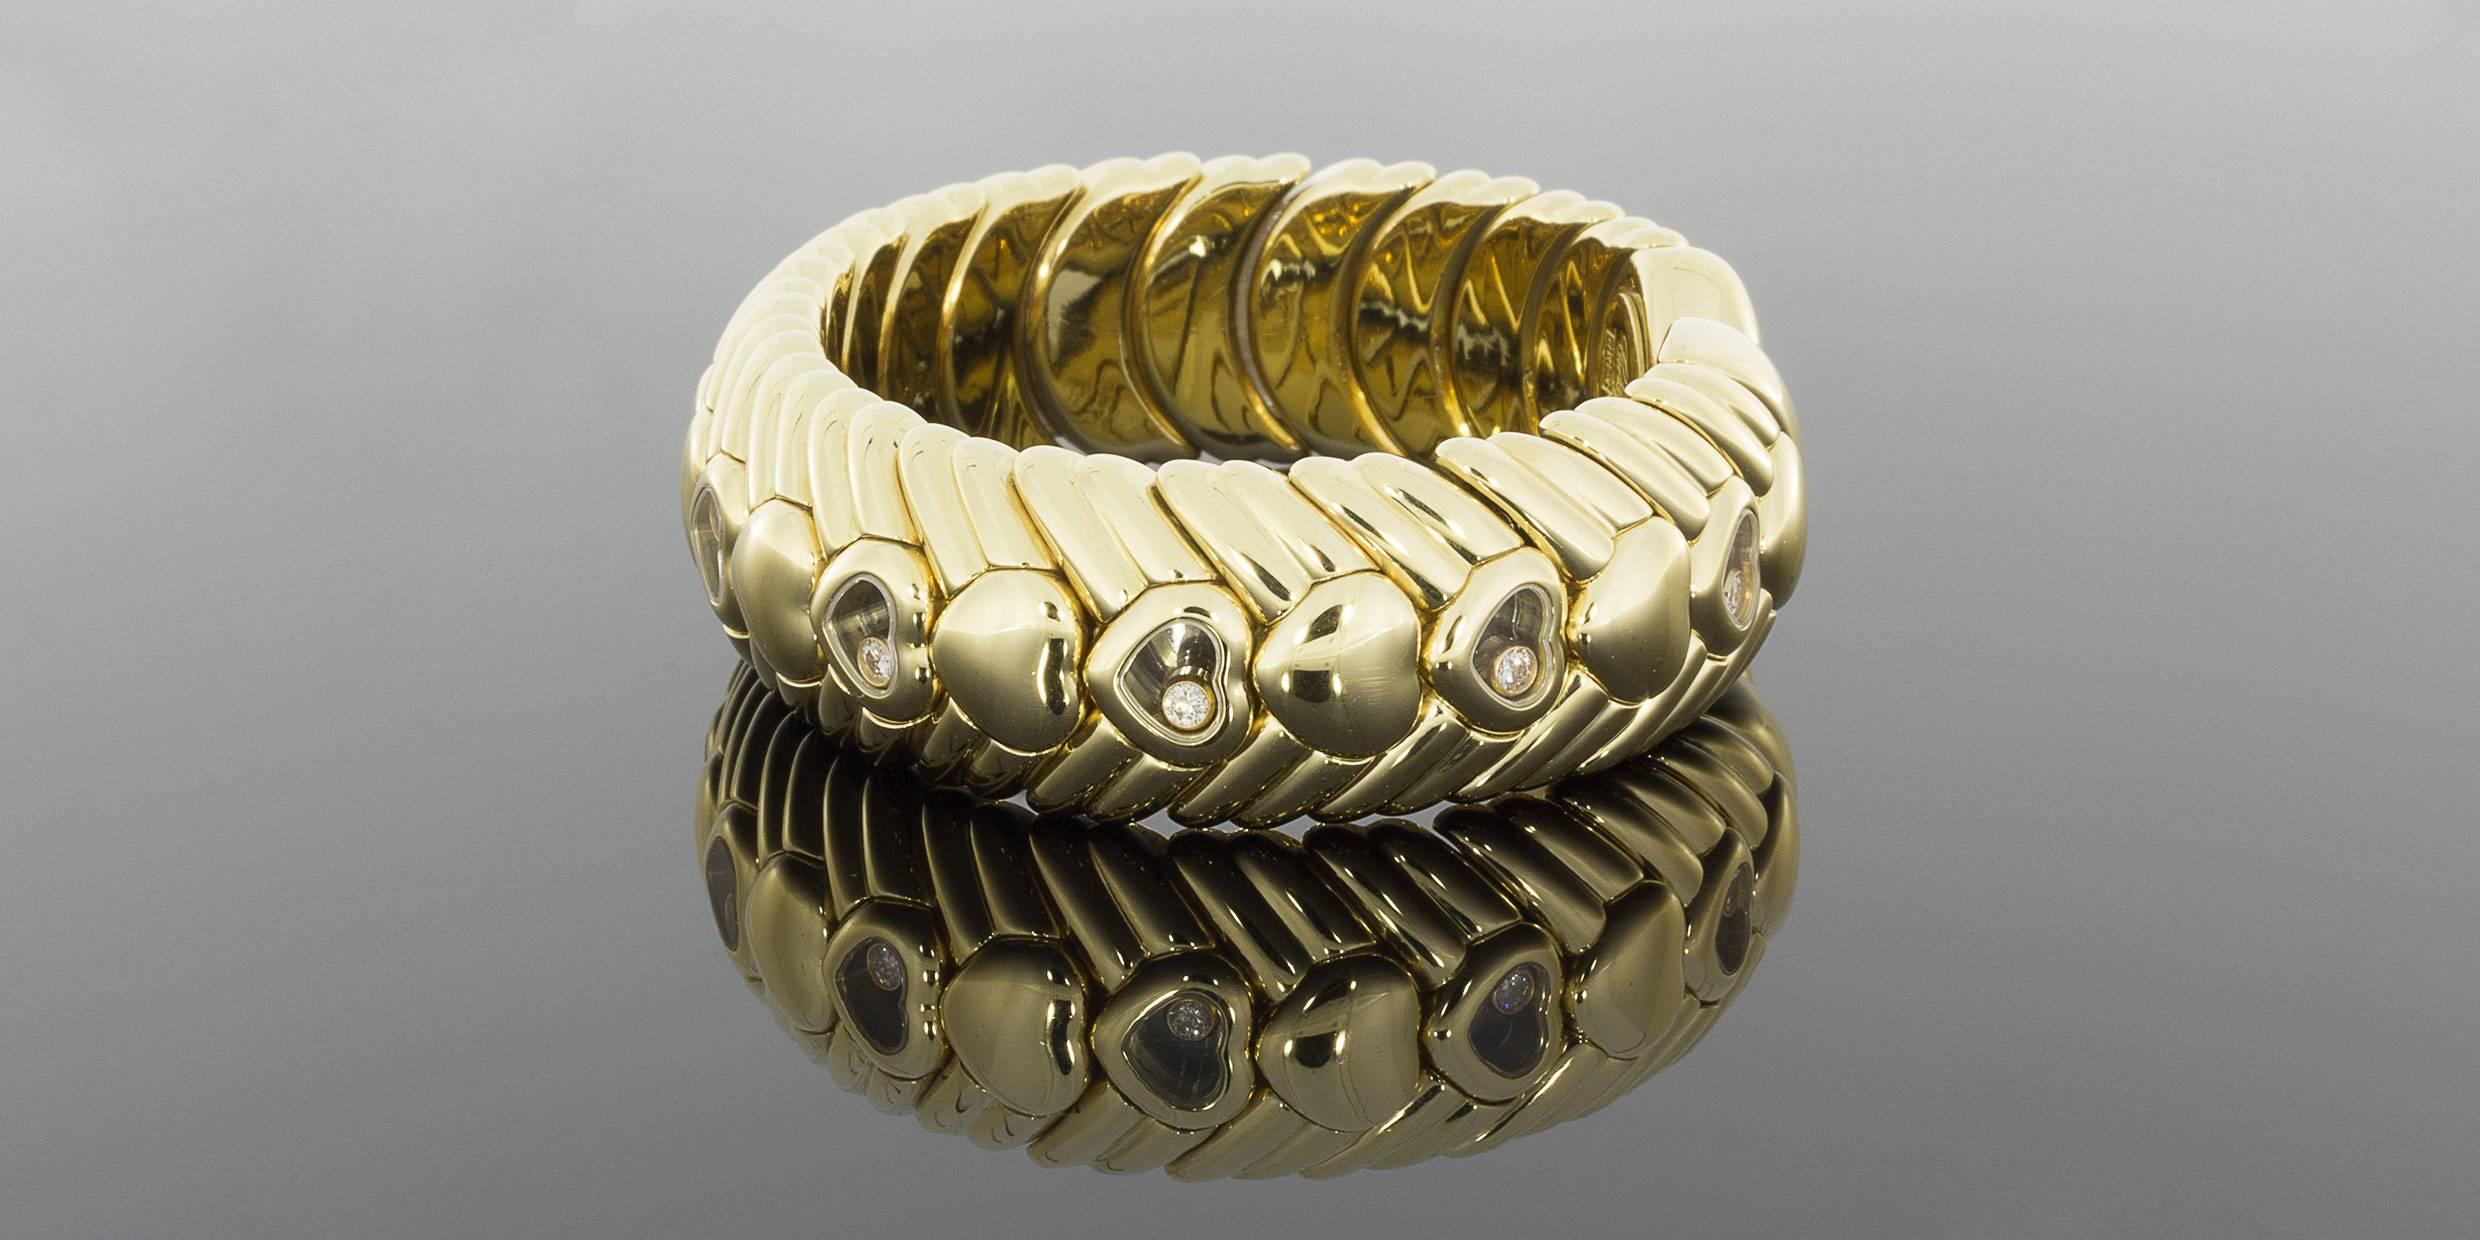 Rare Chopard 18 Karat Yellow Gold Happy Diamonds Heart Flex Bangle Bracelet In Excellent Condition For Sale In Columbia, MO